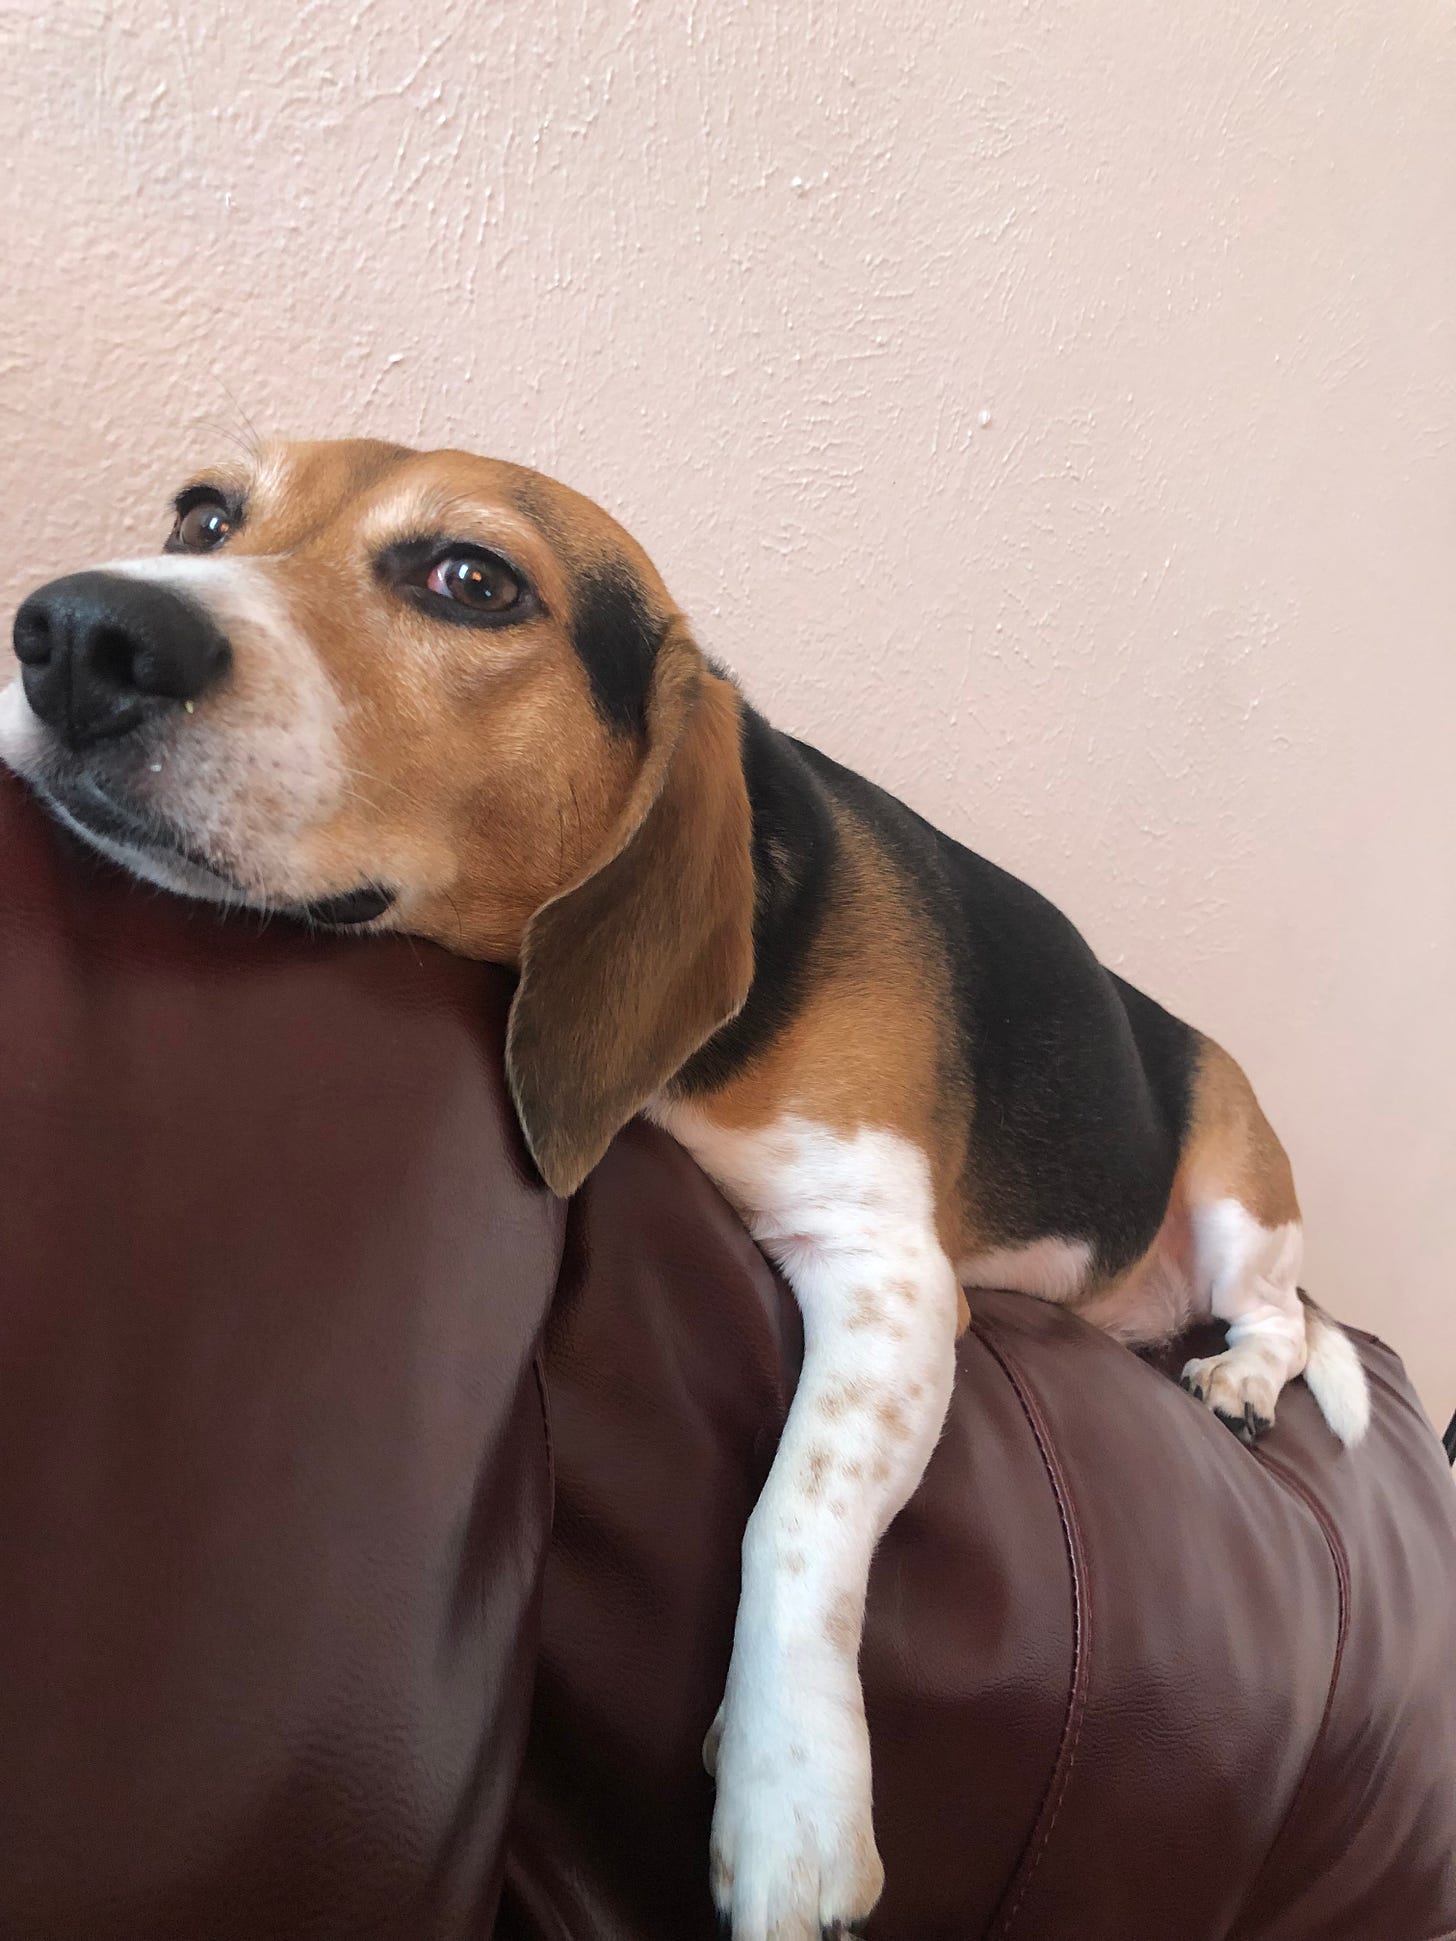 A shamelessly included picture of my dog, a beagle, resting on a couch